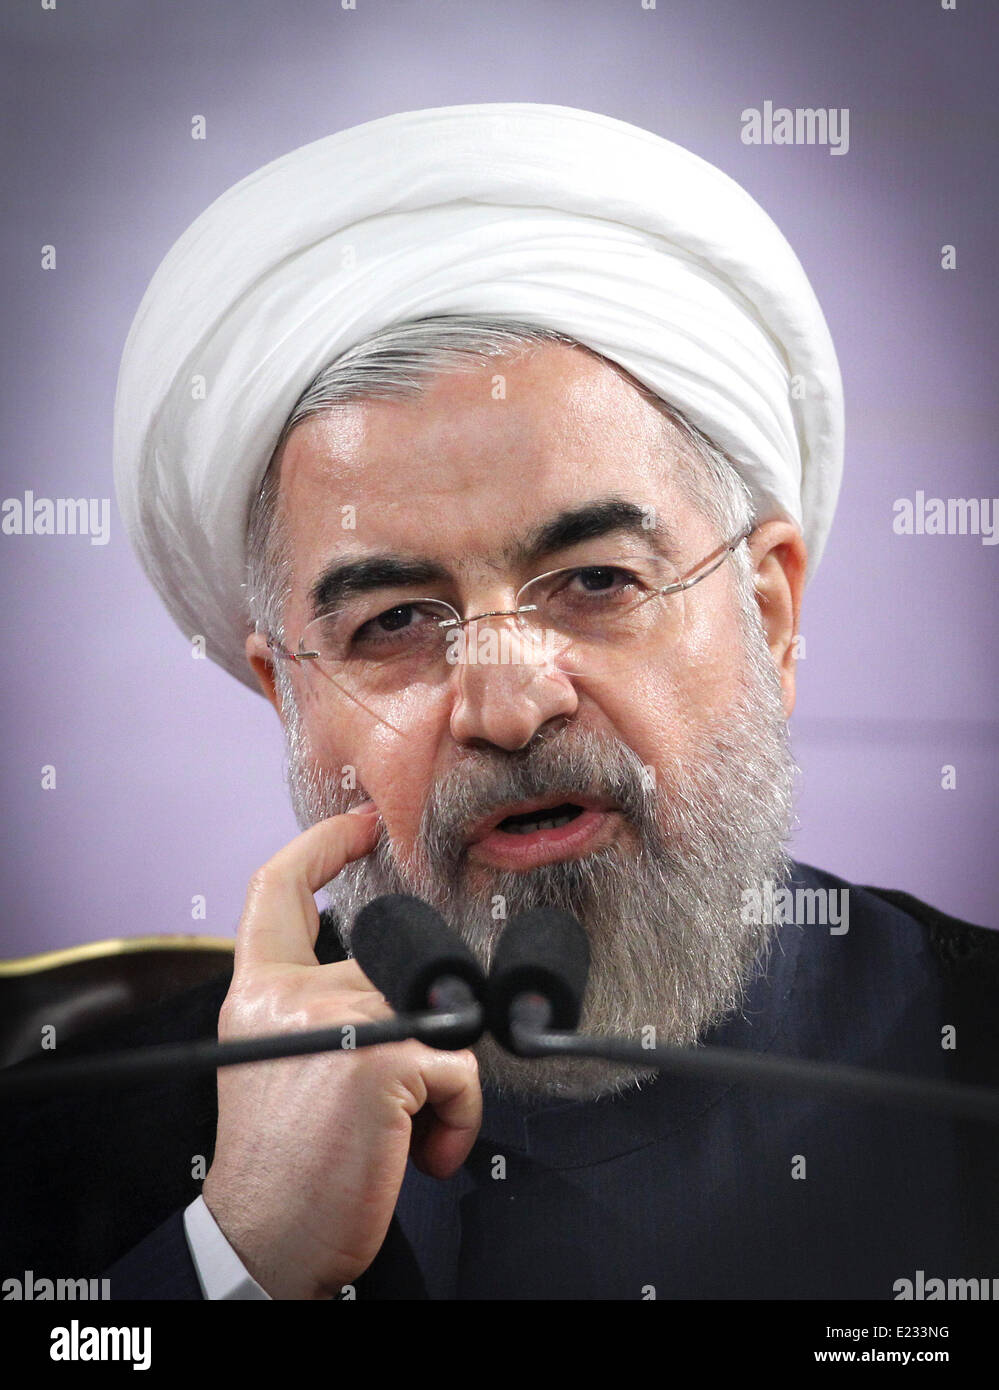 Tehran Iran 14th June 2014 Iranian President Hassan Rouhani Reacts During A Press Conference